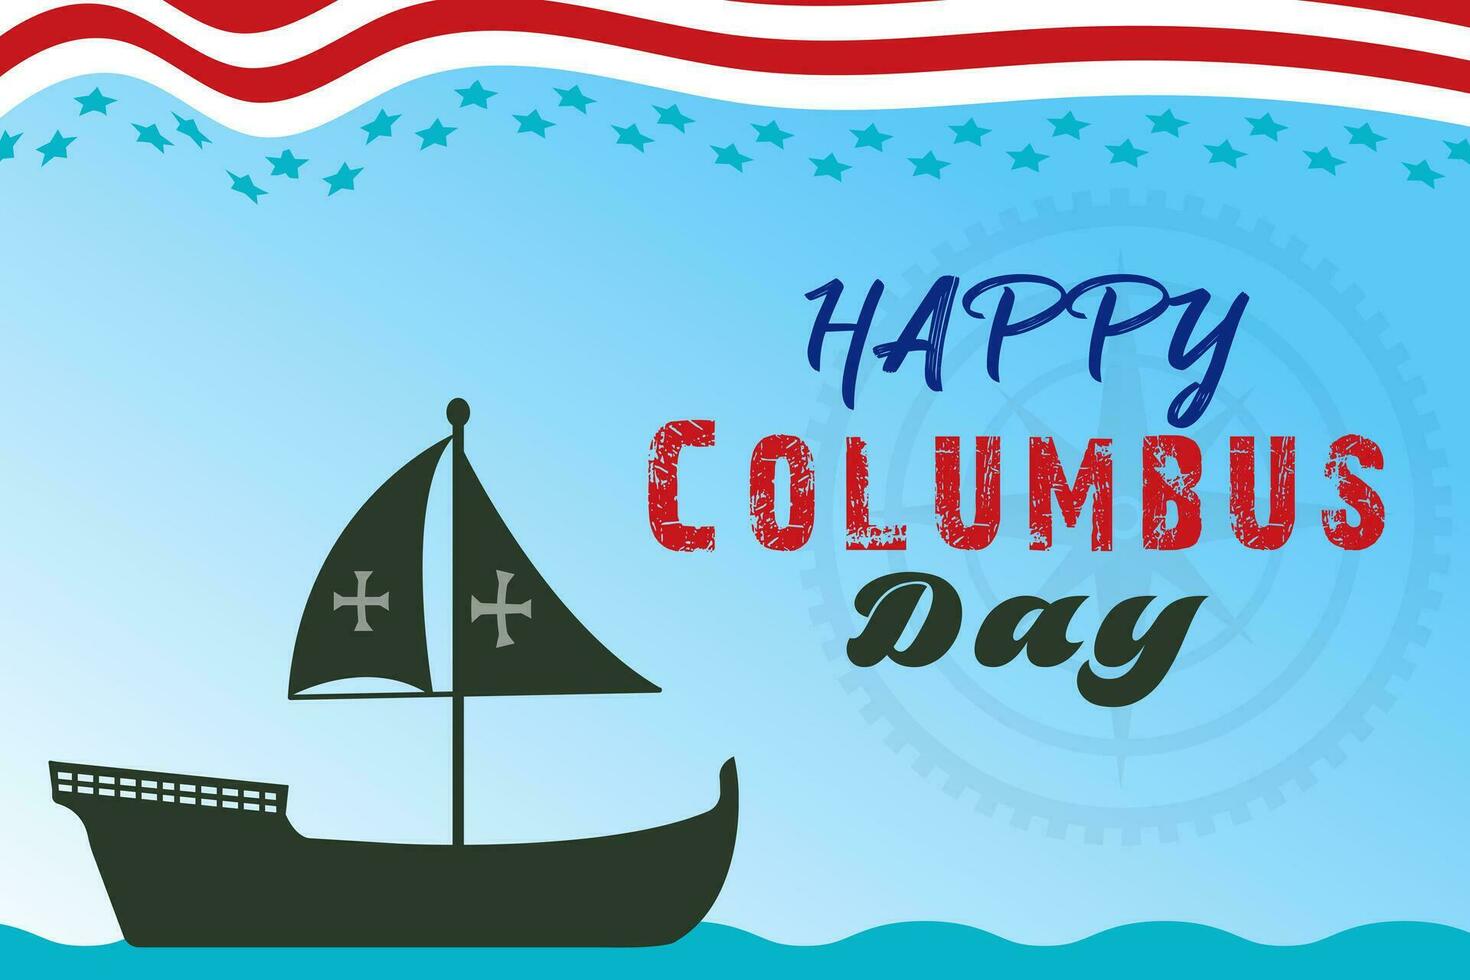 Happy Columbus Day Greetings card with Sailing ship sailboat. Christopher Columbus National Usa Holiday banner with American Flag, sea waves, Steer Wheel and compass. Discovery of America Spain theme. vector